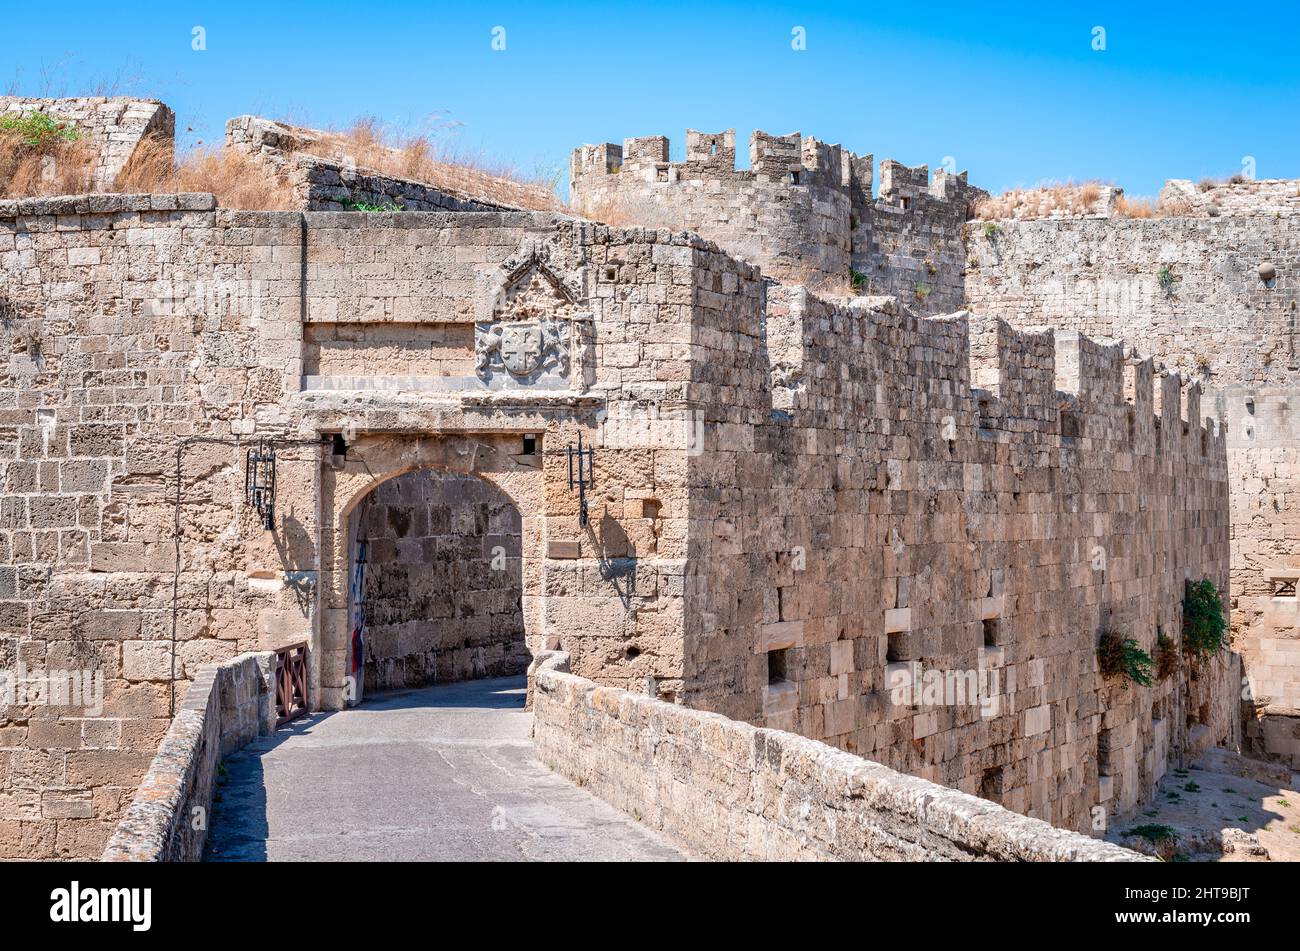 The gate of St Athanasius, part of the fortification of the medieval town of Rhodes, Dodecanese, Greece. Stock Photo